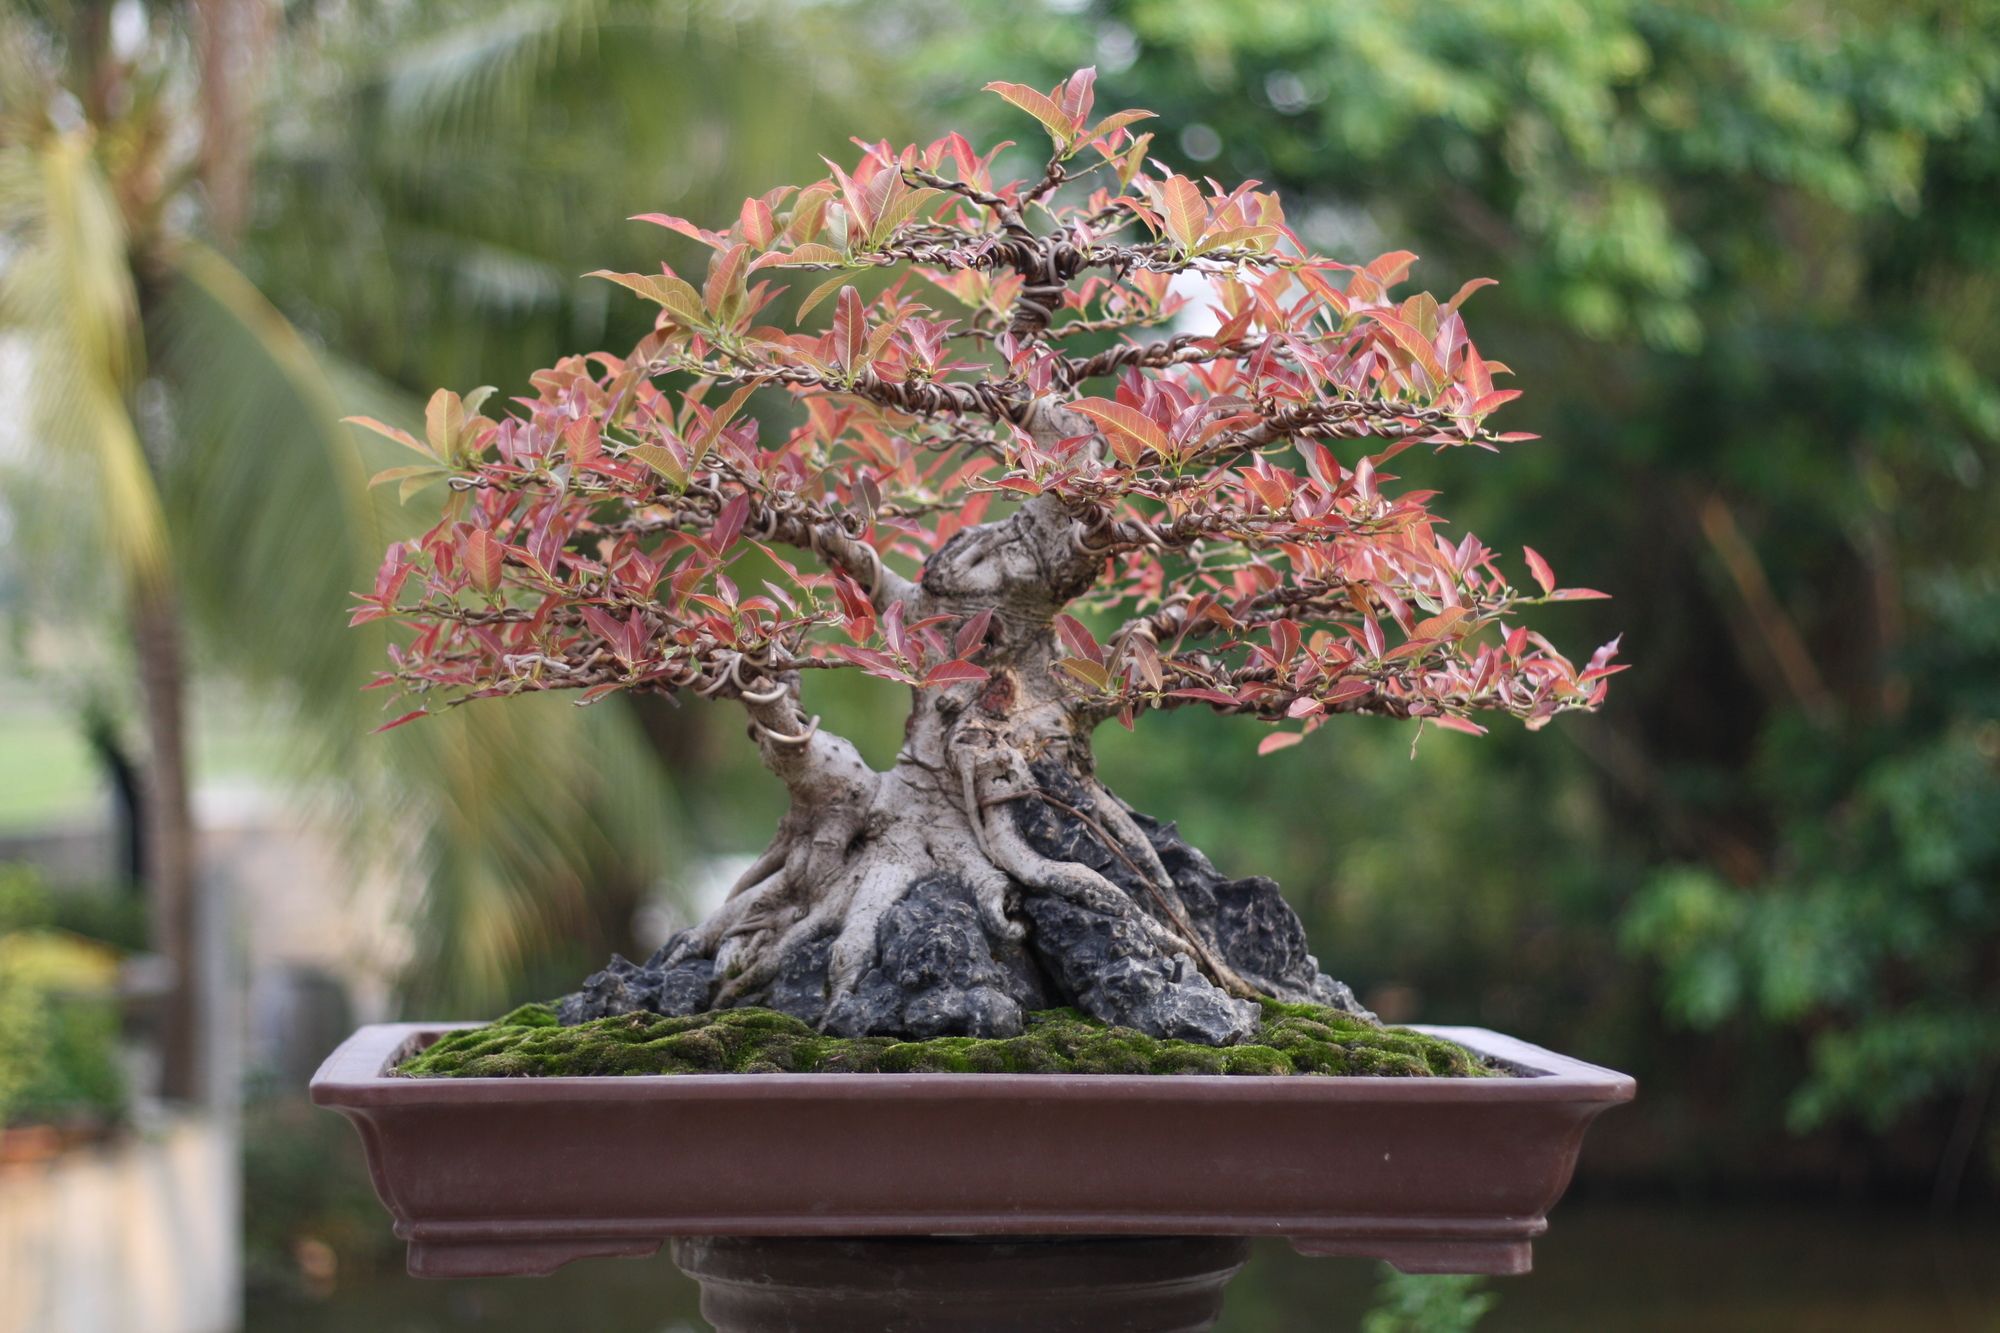 Small bonsai tree planted in a old rectangular pot situated in a high elevation